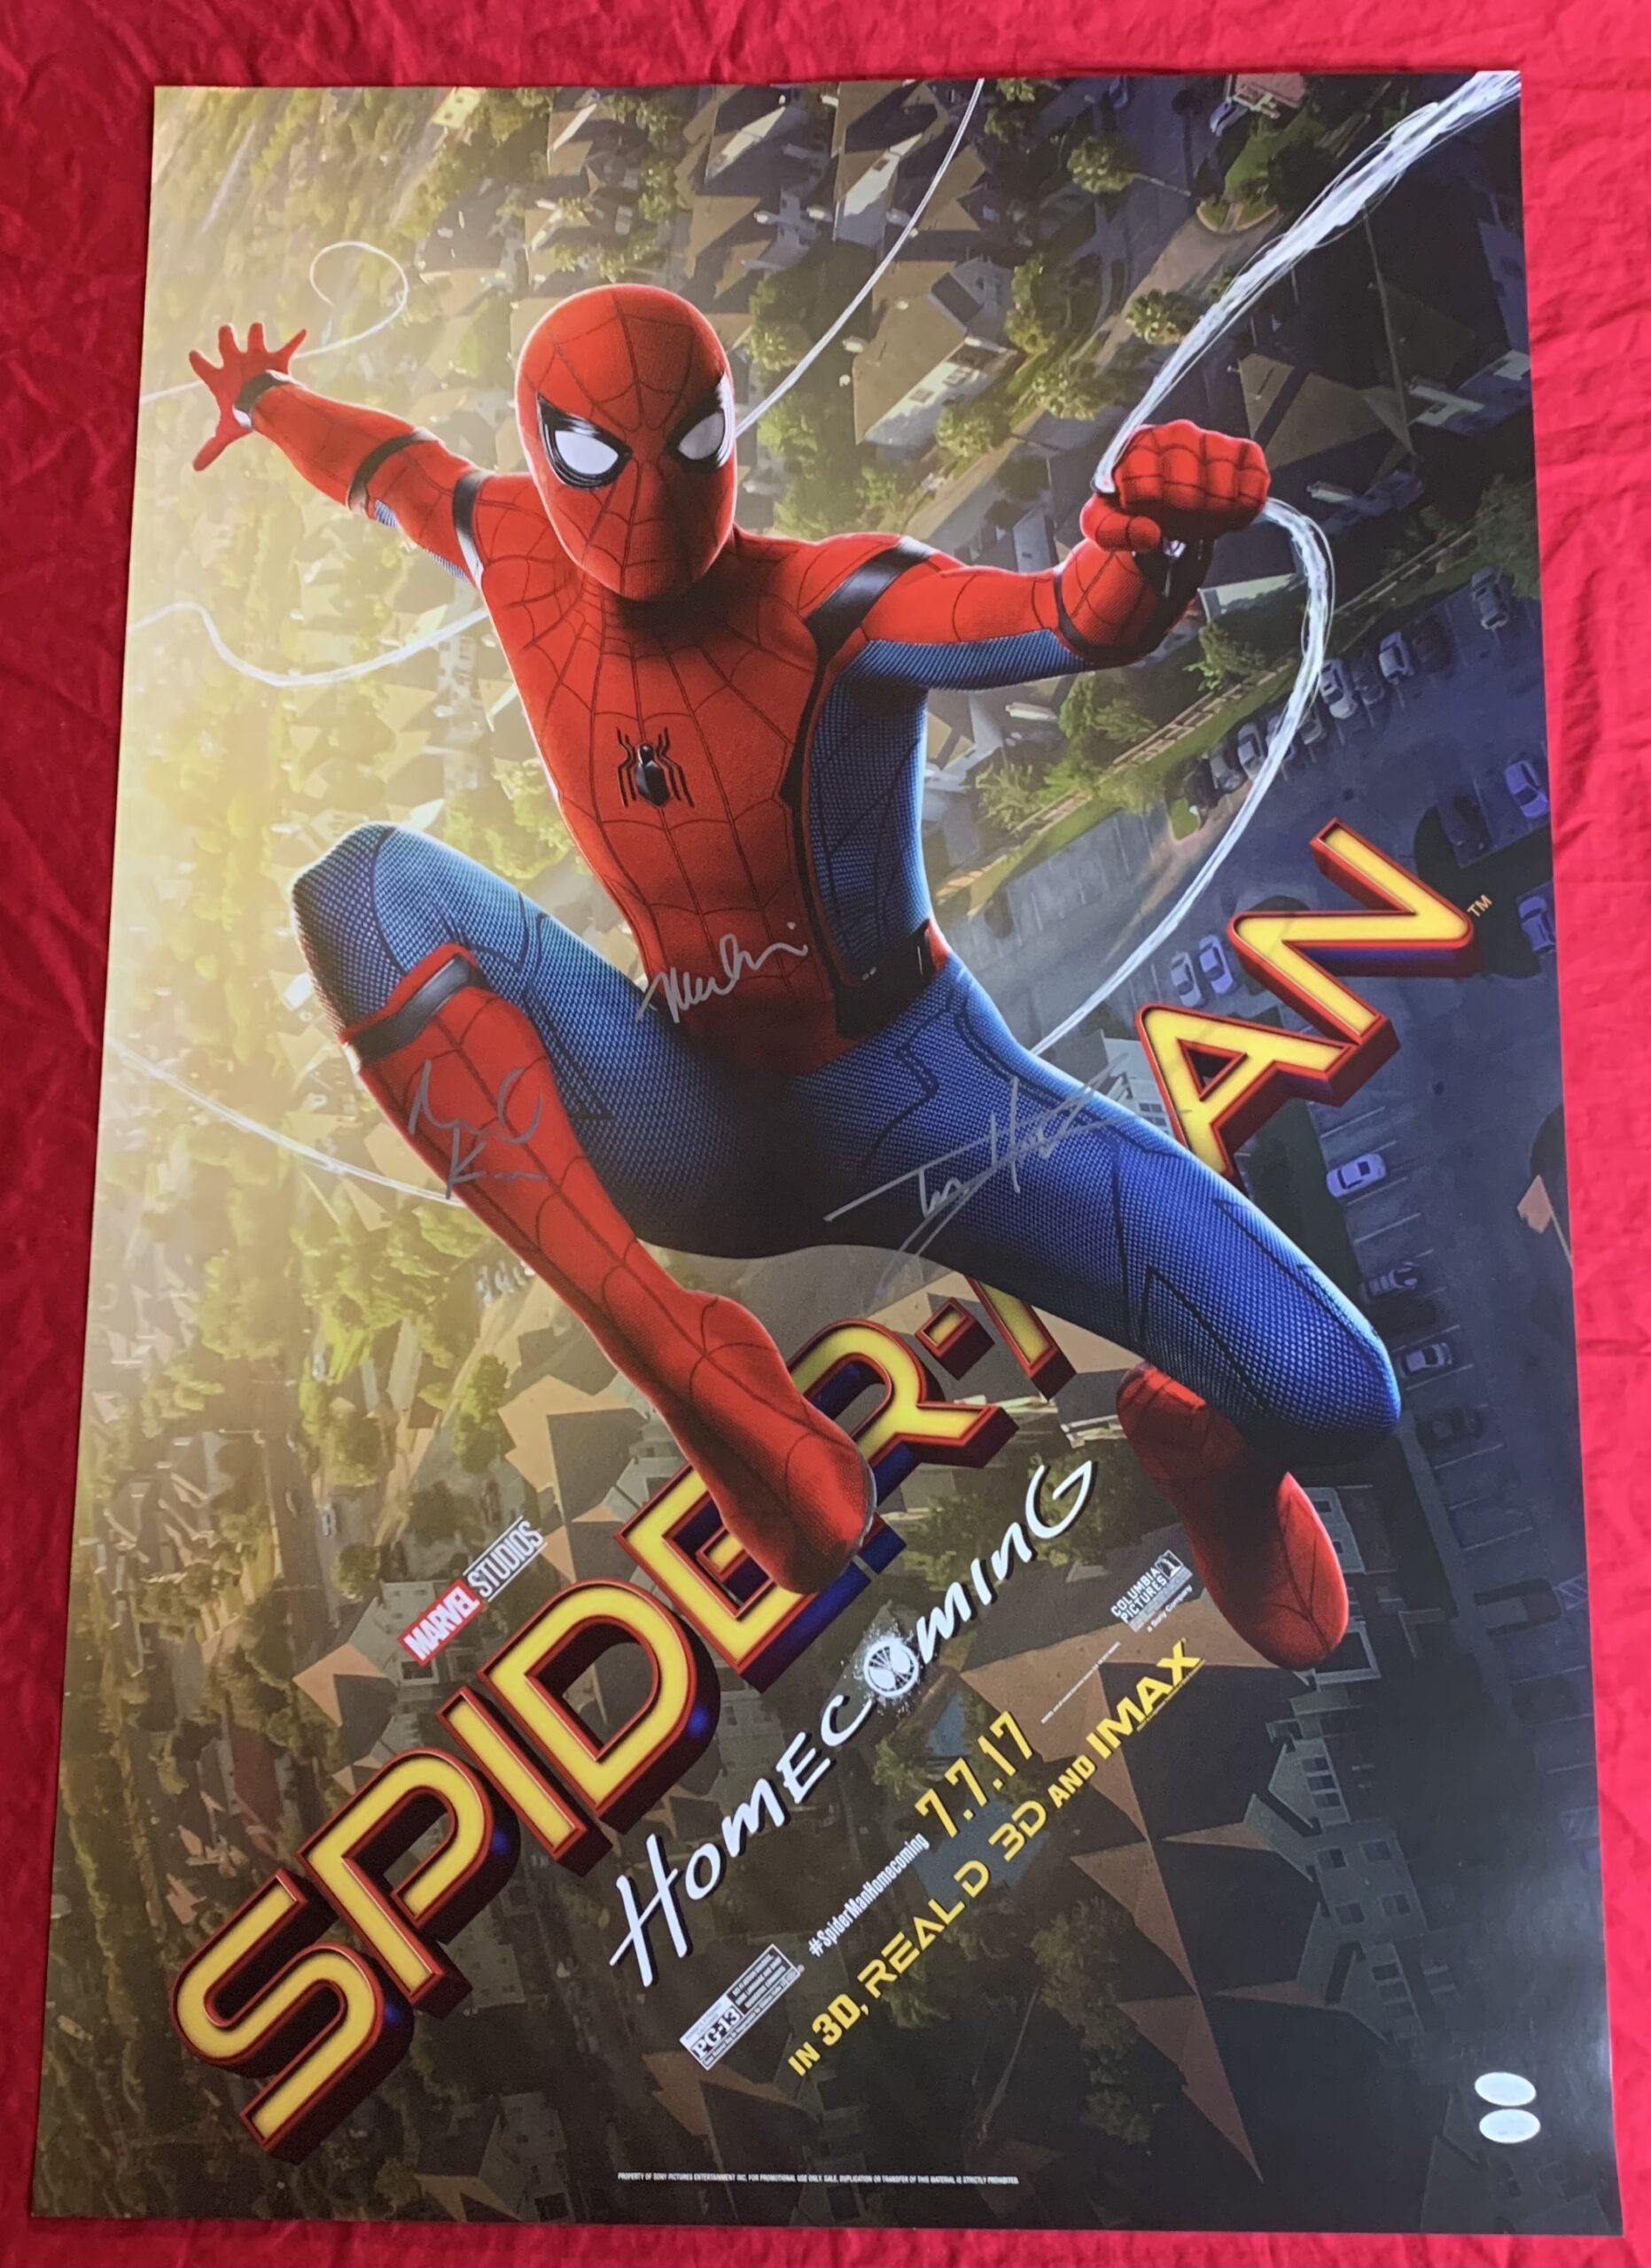 Spider-Man: Homecoming Movie Poster (#11 of 56) - IMP Awards